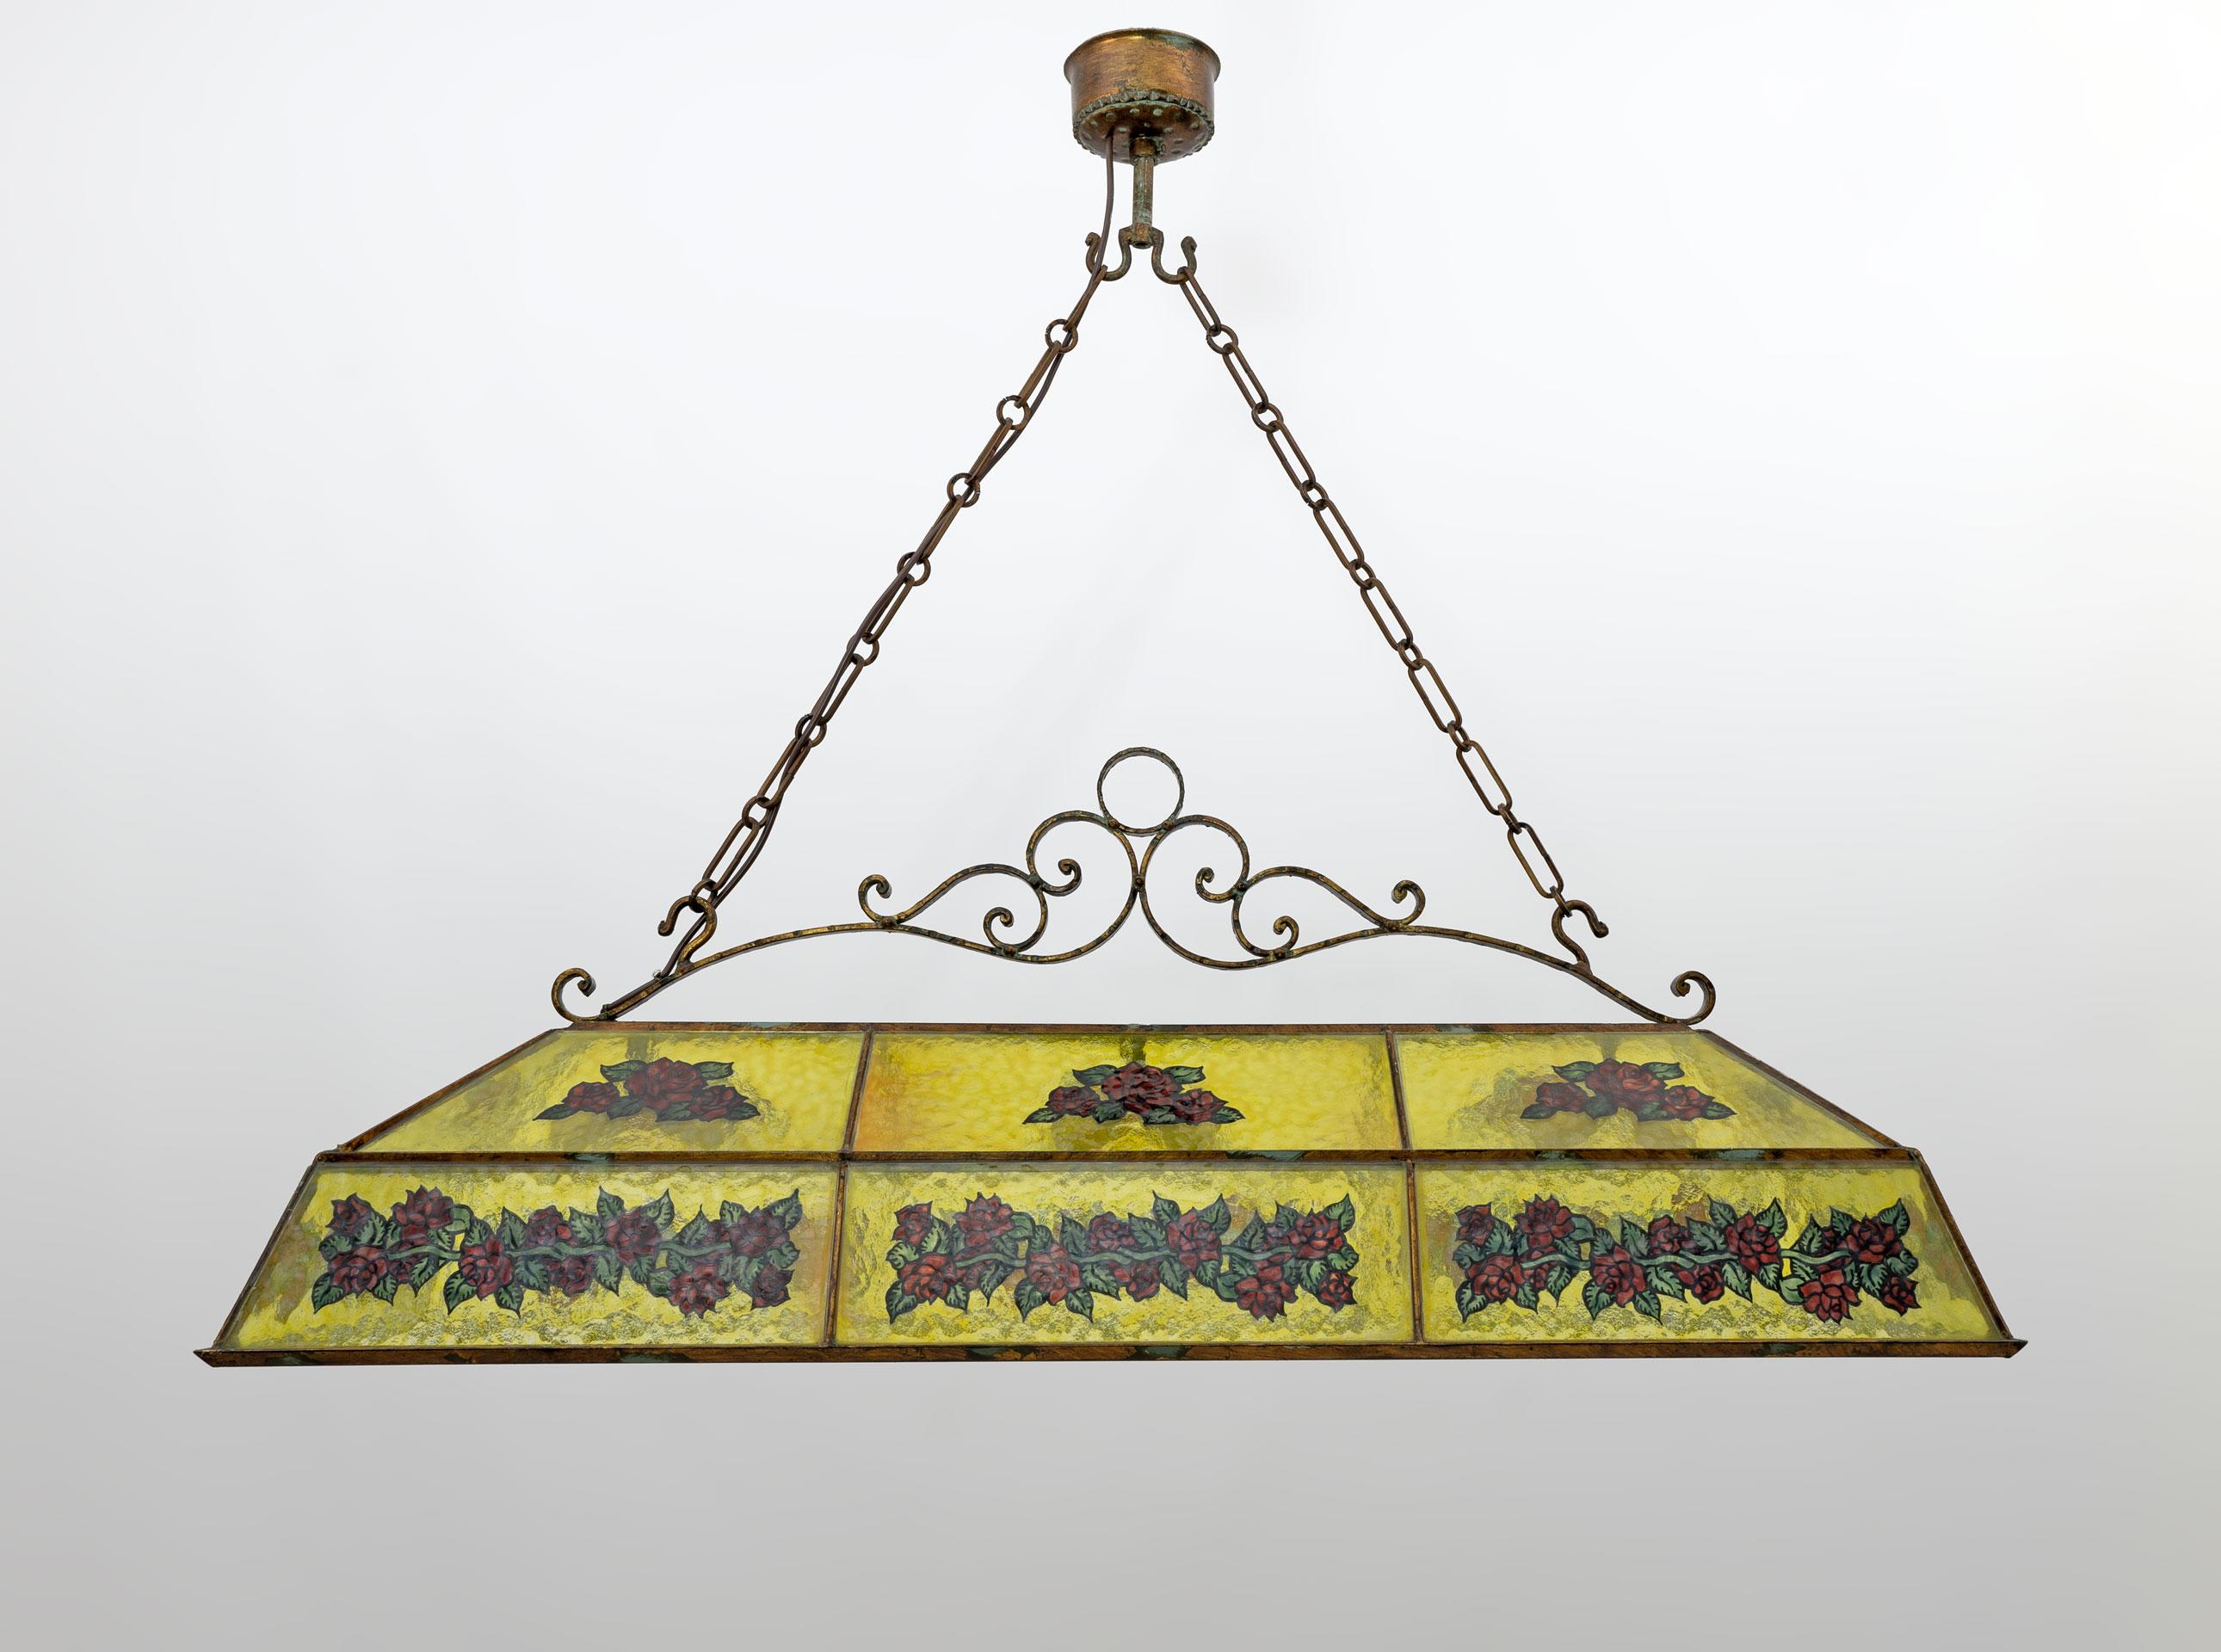 Italian Rustic Hand-Painted Wrought Iron and Glass Pendant Chandelier, 1960s For Sale